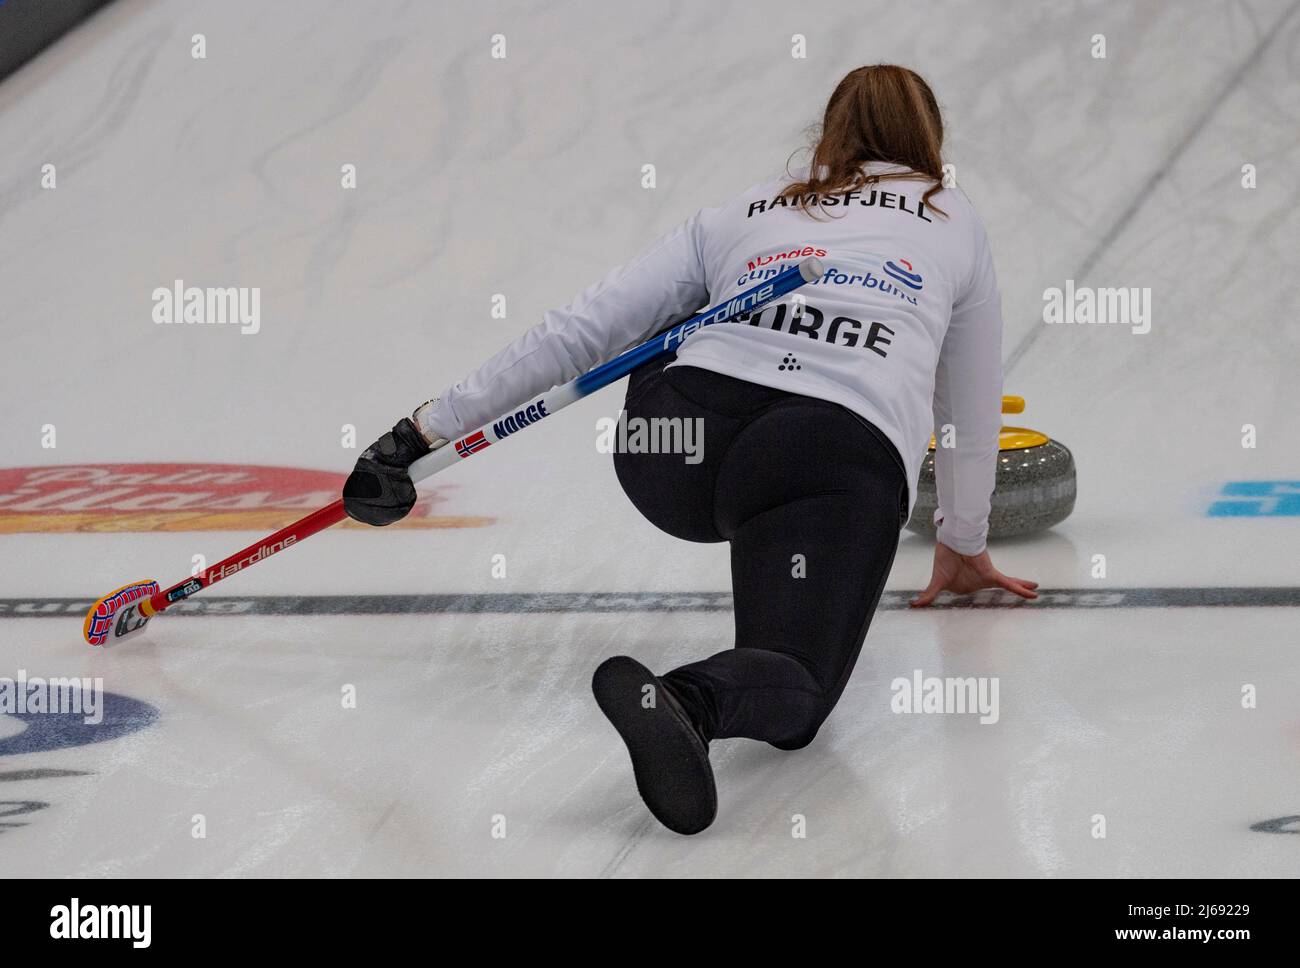 Geneva Switzerland, 29th April 2022 Maia RAMSFJELL of Norway is in action during the World Mixed Doubles Curling Championship 2022